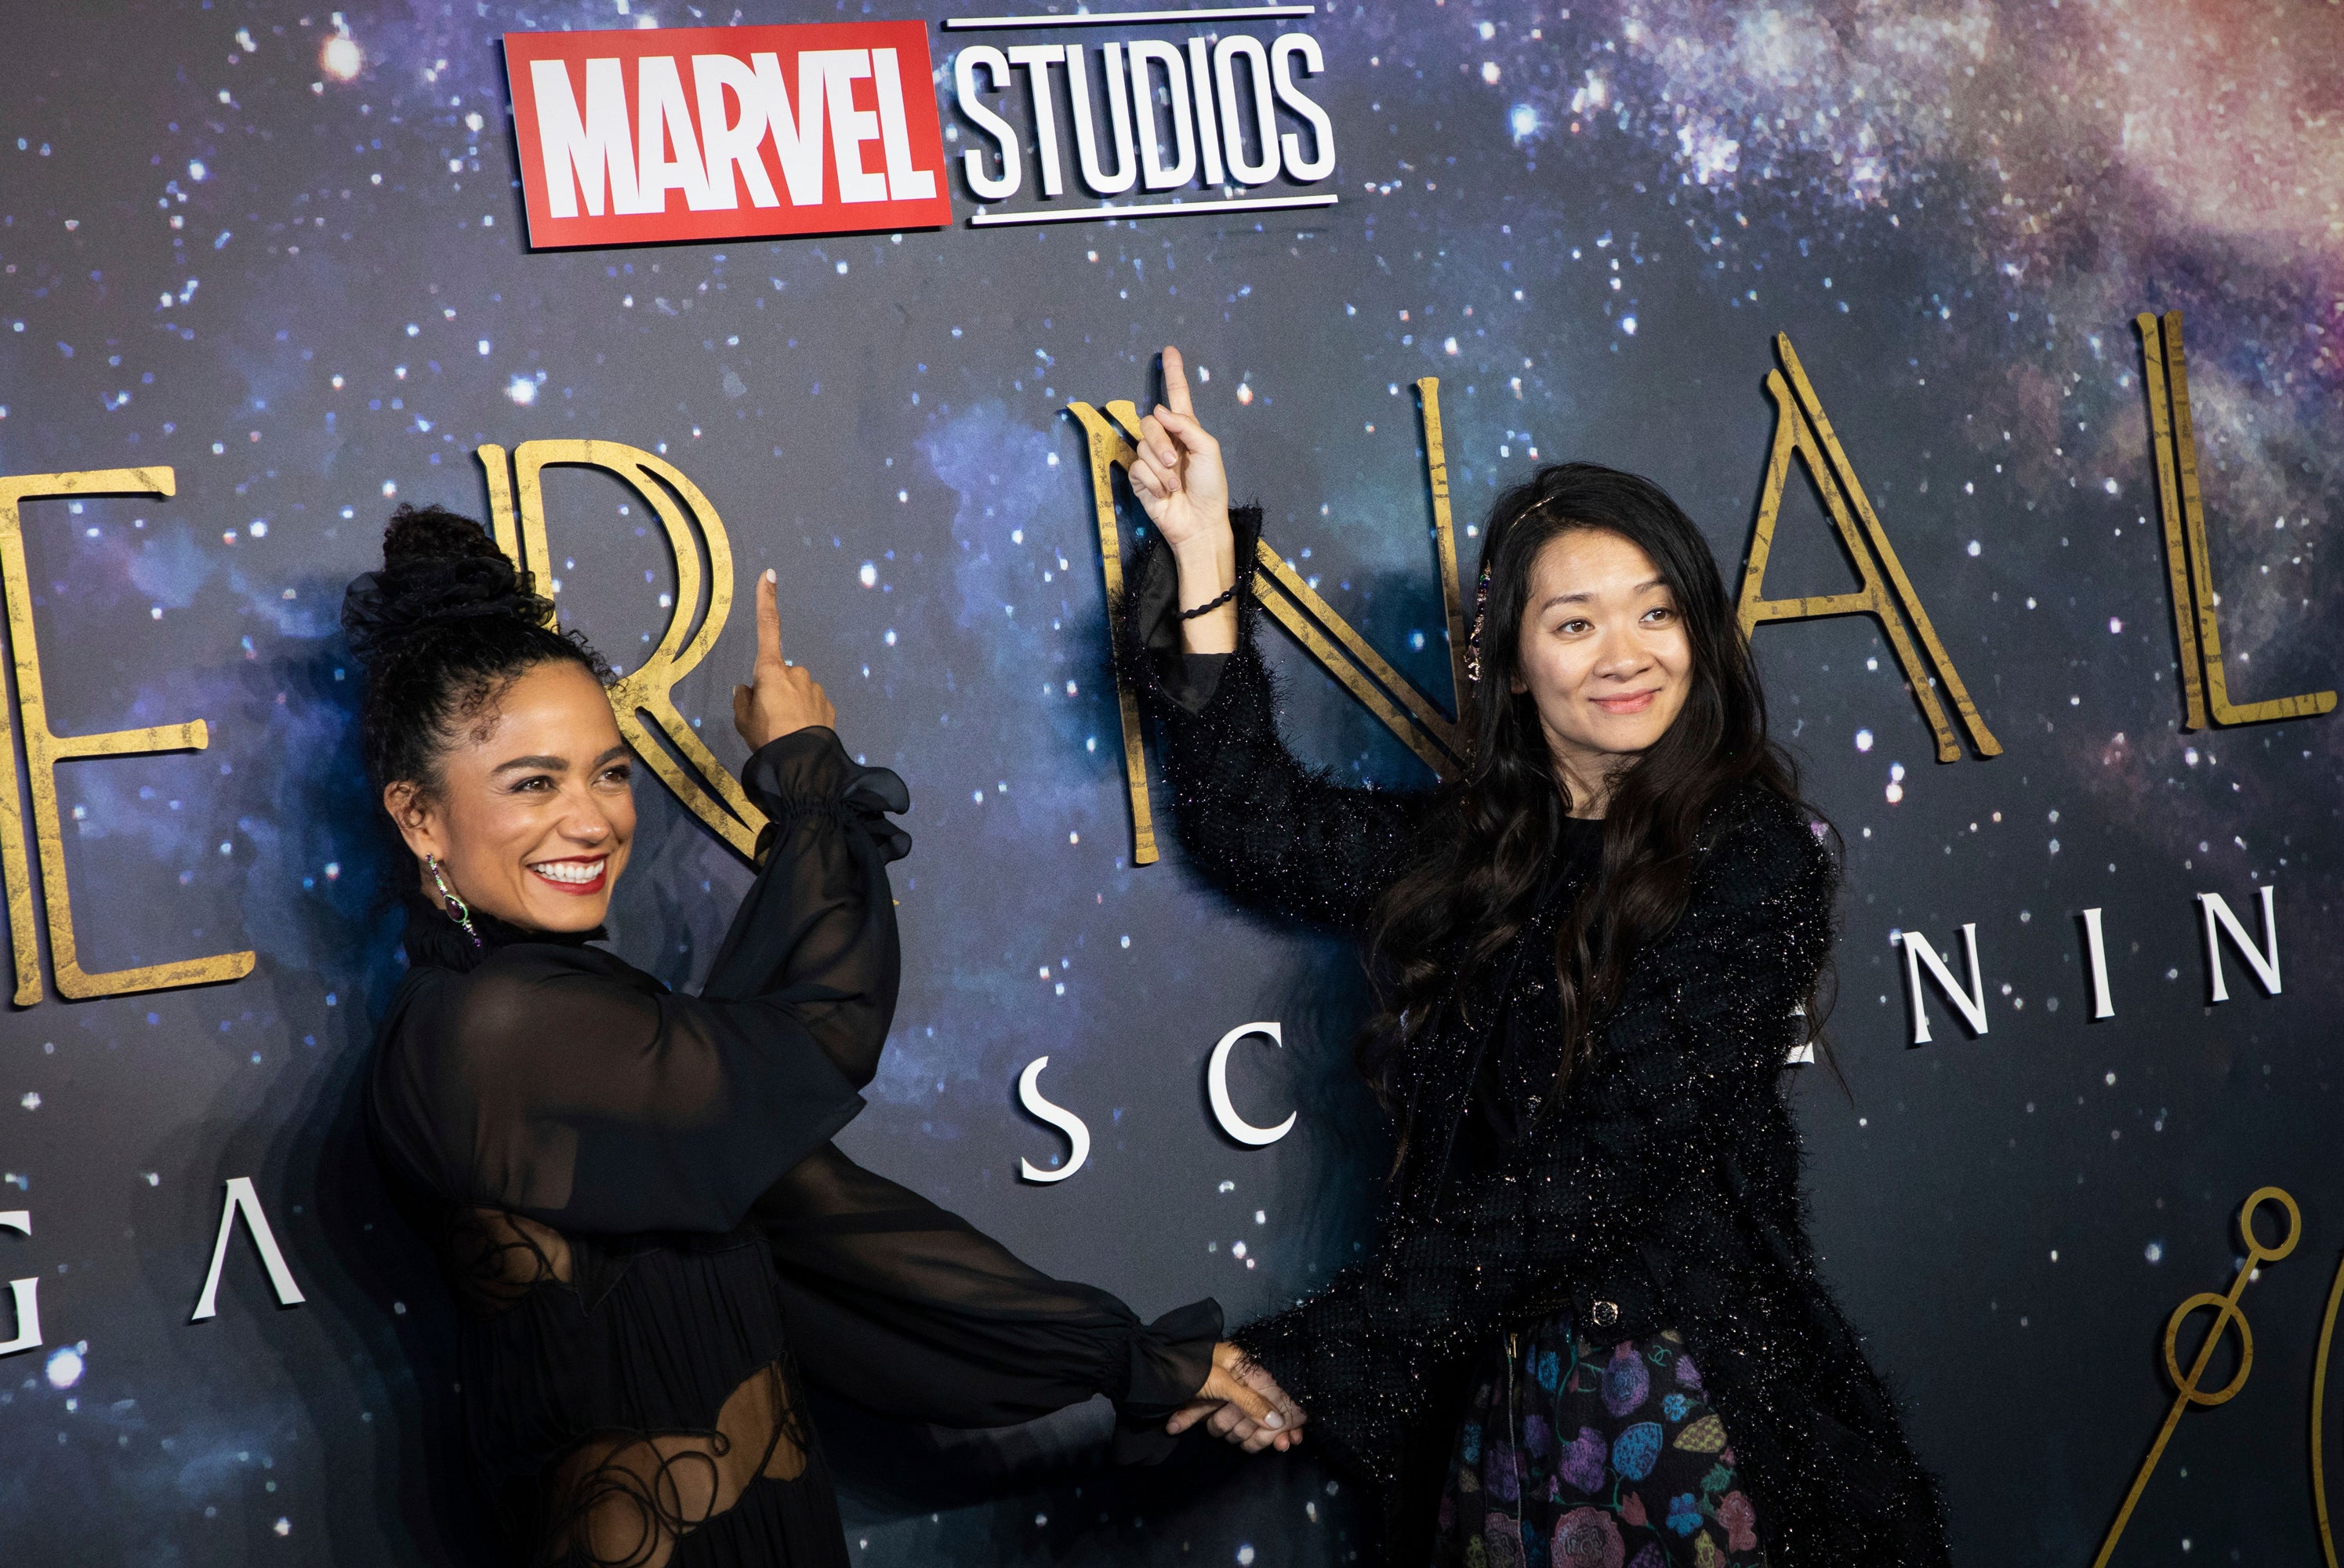 Director Chloé Zhao On Marvels New Diverse Superheroes